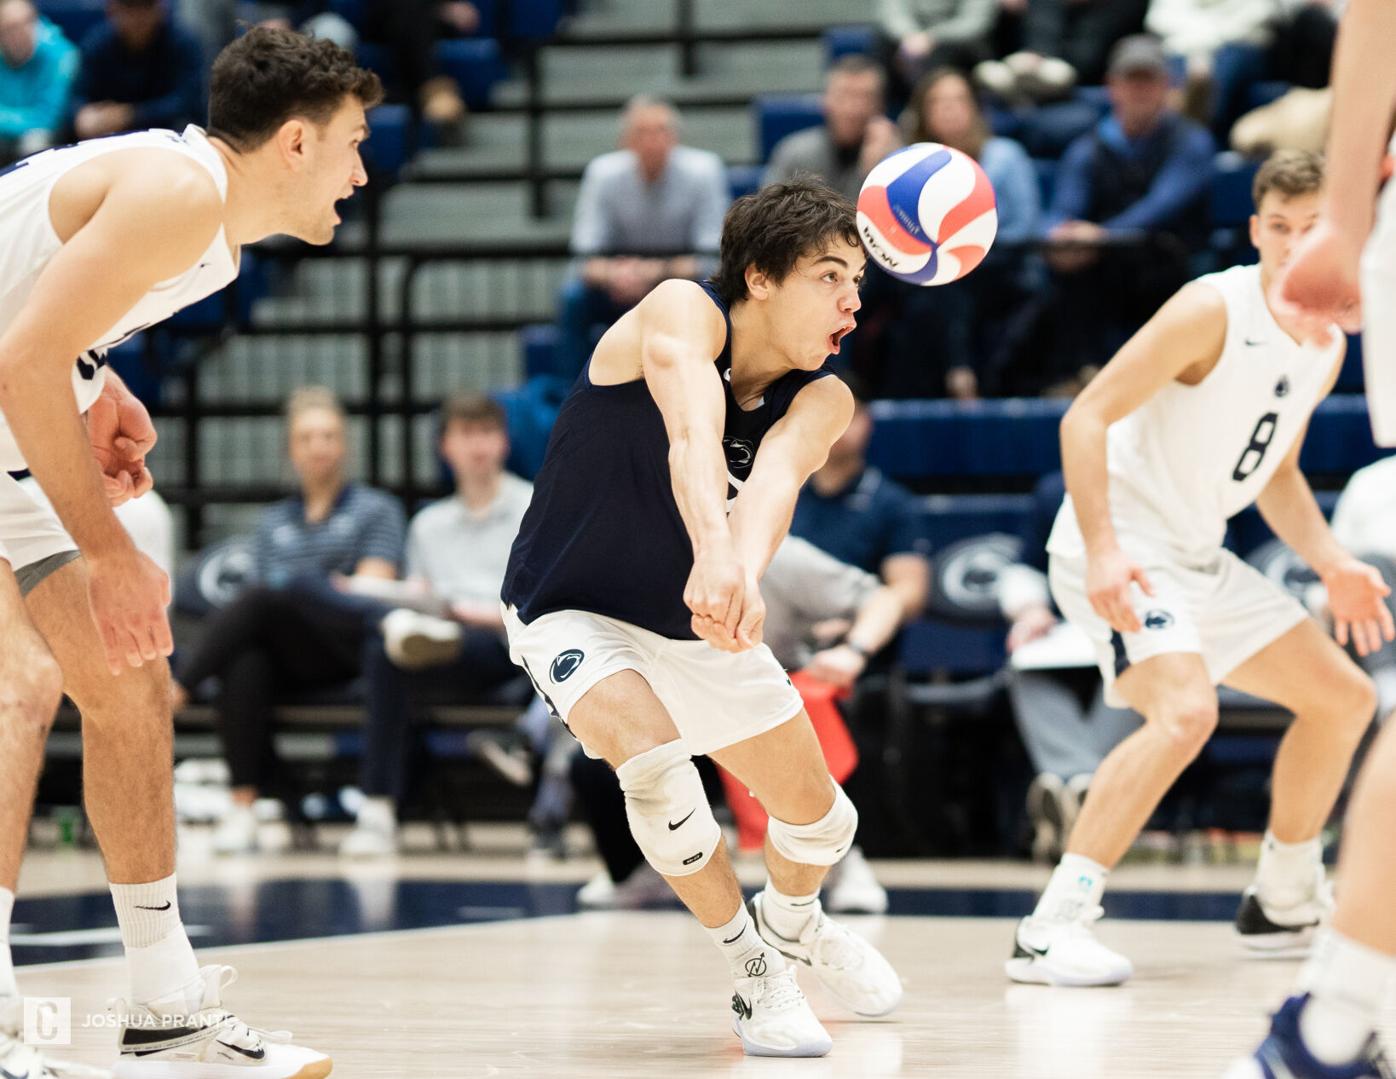 Men's volleyball sophomores Owen Rose, Ryan Merk reflect on summer with  national U21 squad, Penn State Men's Volleyball News